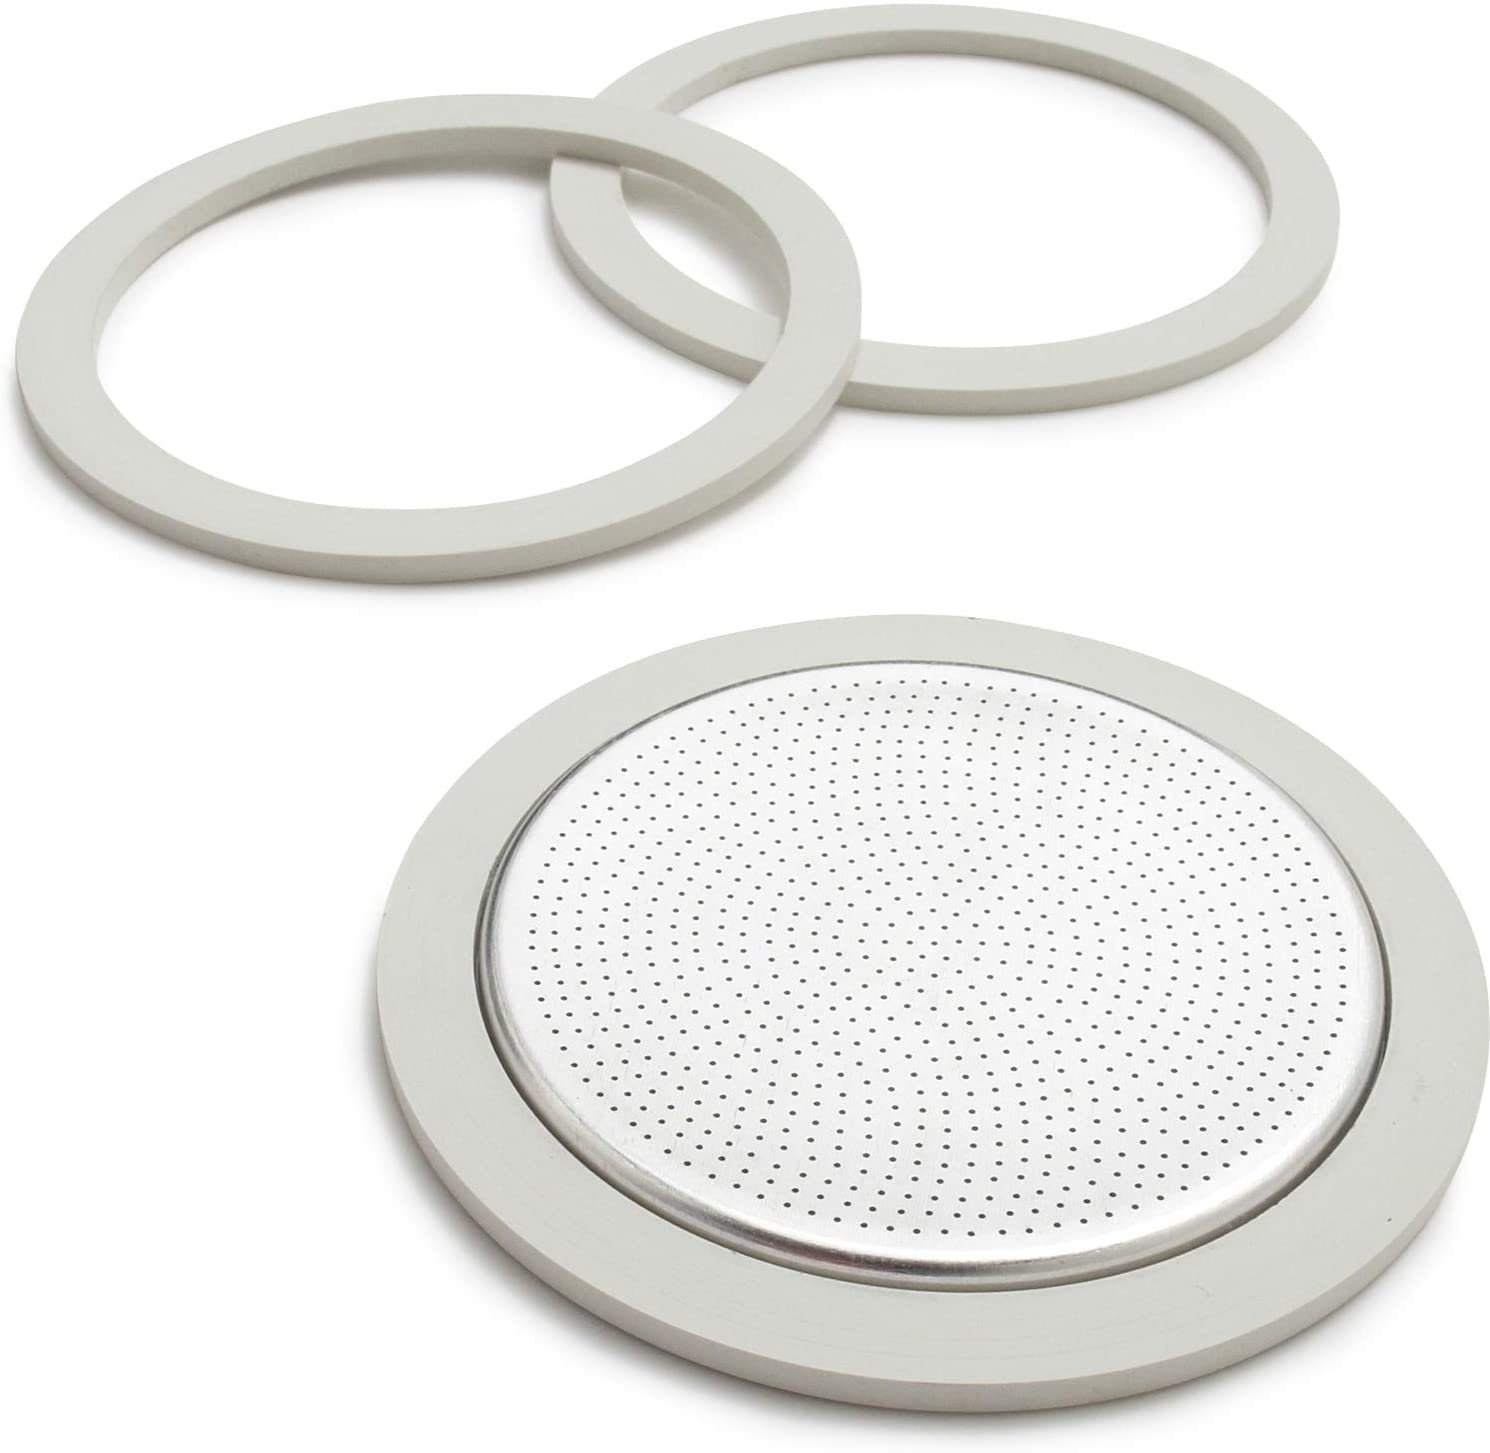 Bialetti 06964 replacement gasket/filter for 12 cup makers. by Bialetti